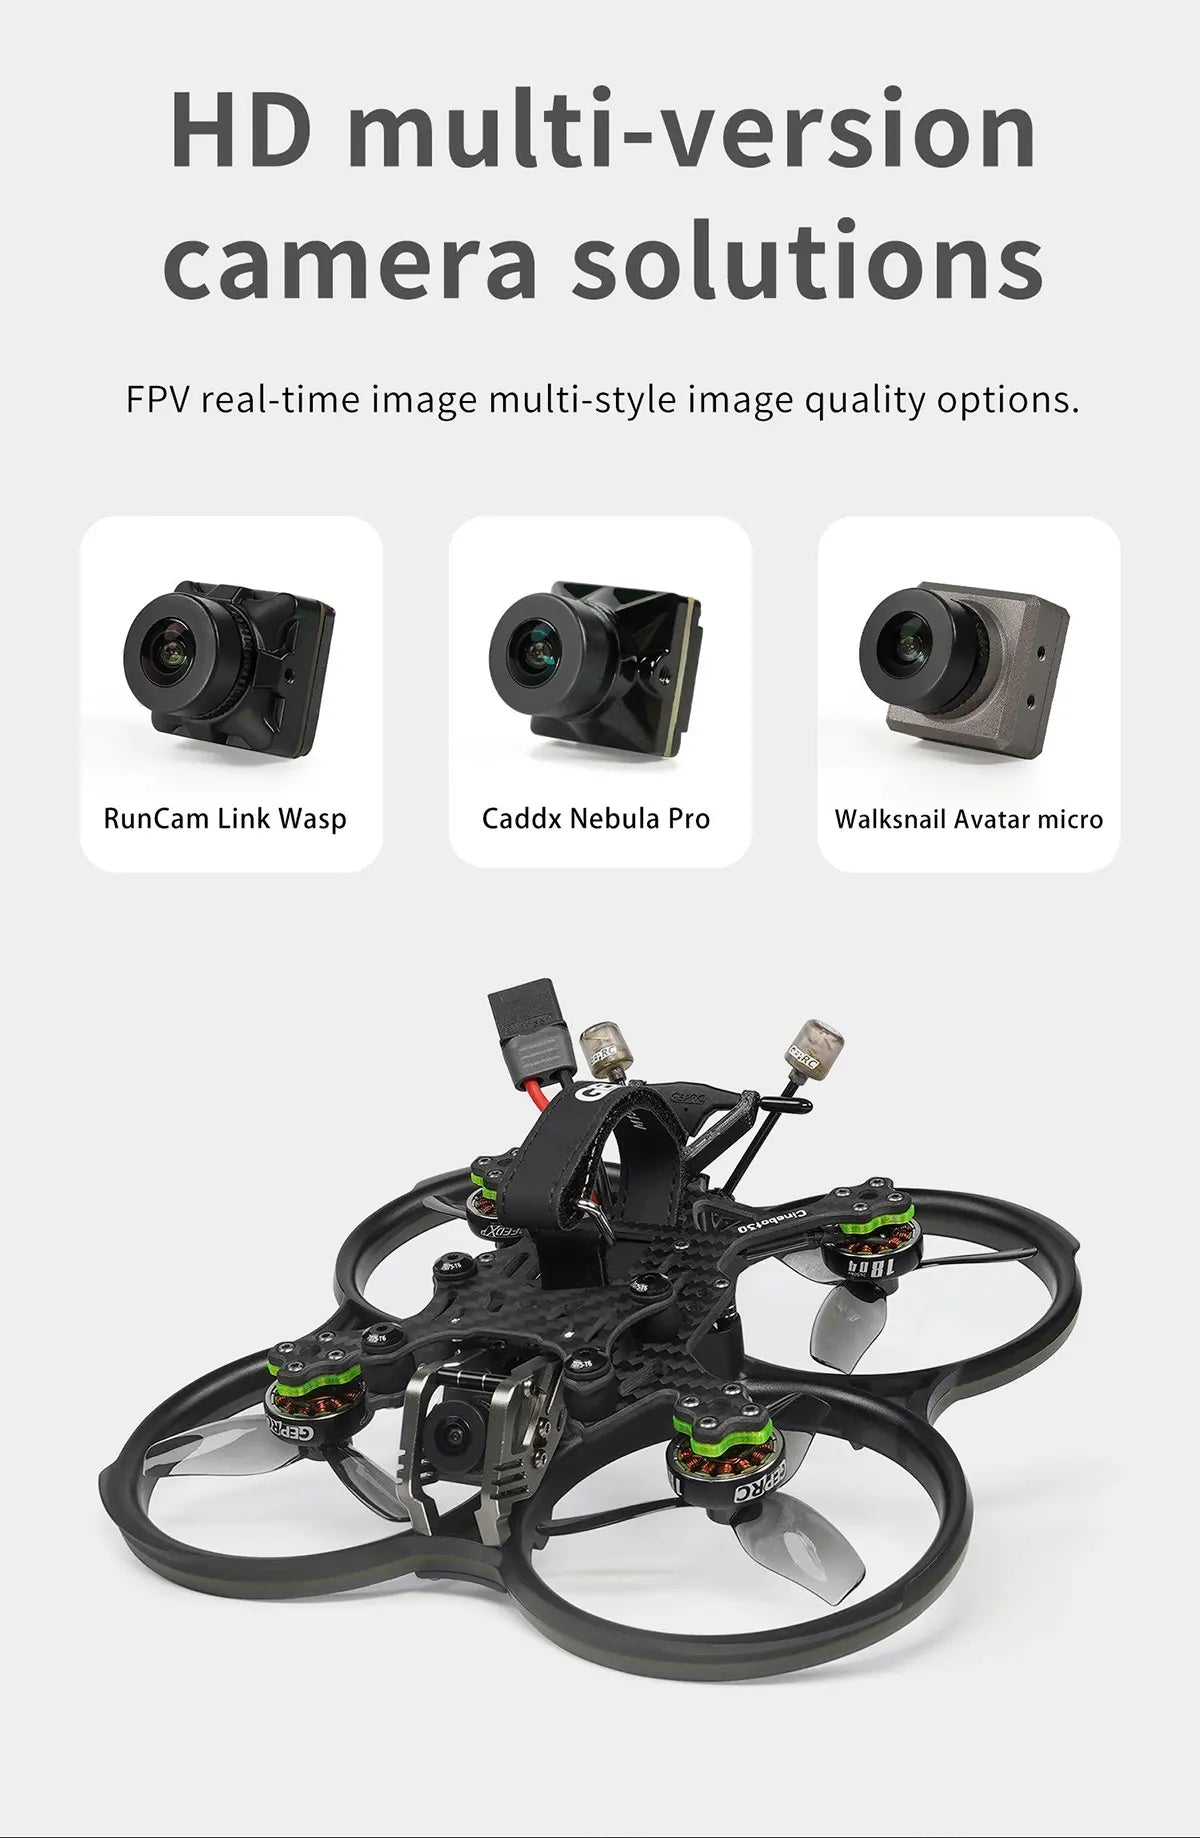 GEPRC NEW Cinebot30  FPV Drone, HD multi-version camera solutions FPV real-time image quality options . RunC